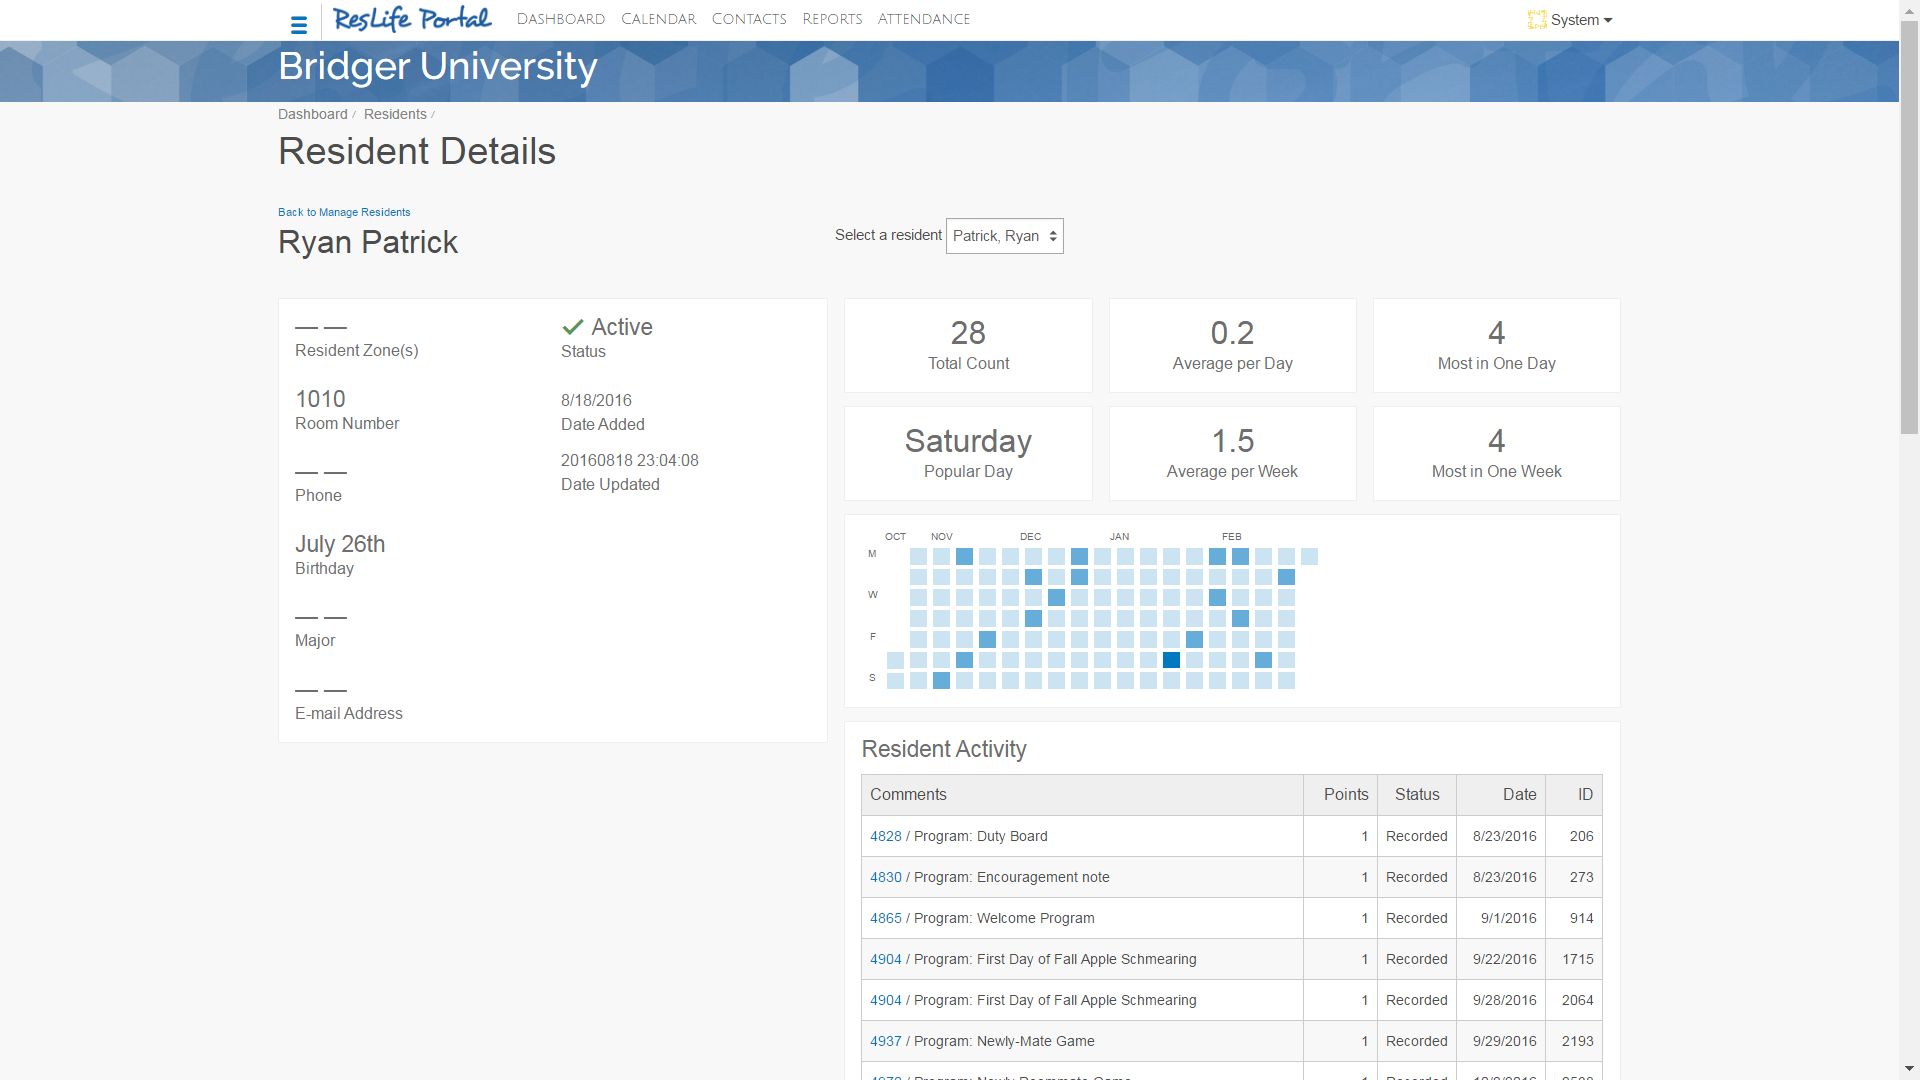 Screen capture of the Resident Details view, showing the records and statistics of the resident’s engagement level.